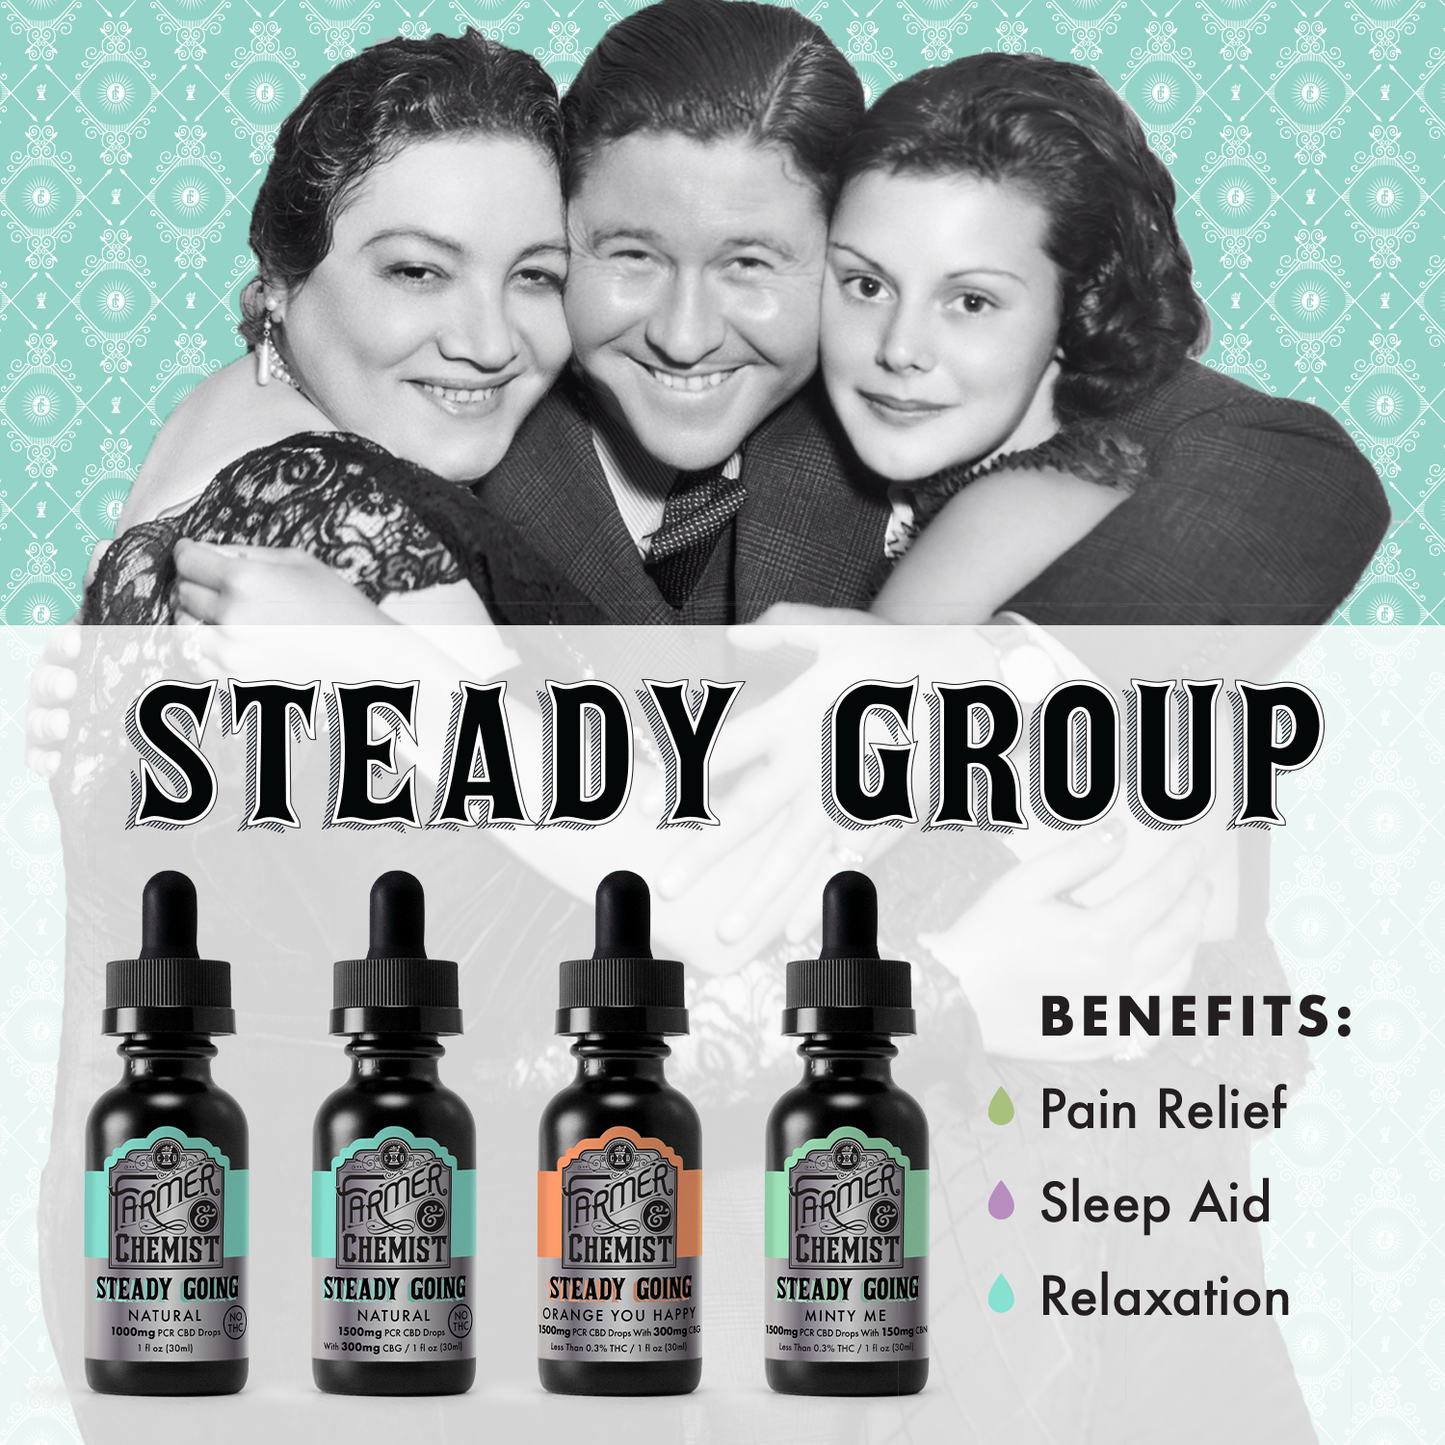 STEADY GOING - Natural 1000mg PCR Tincture (Case pack of 4)